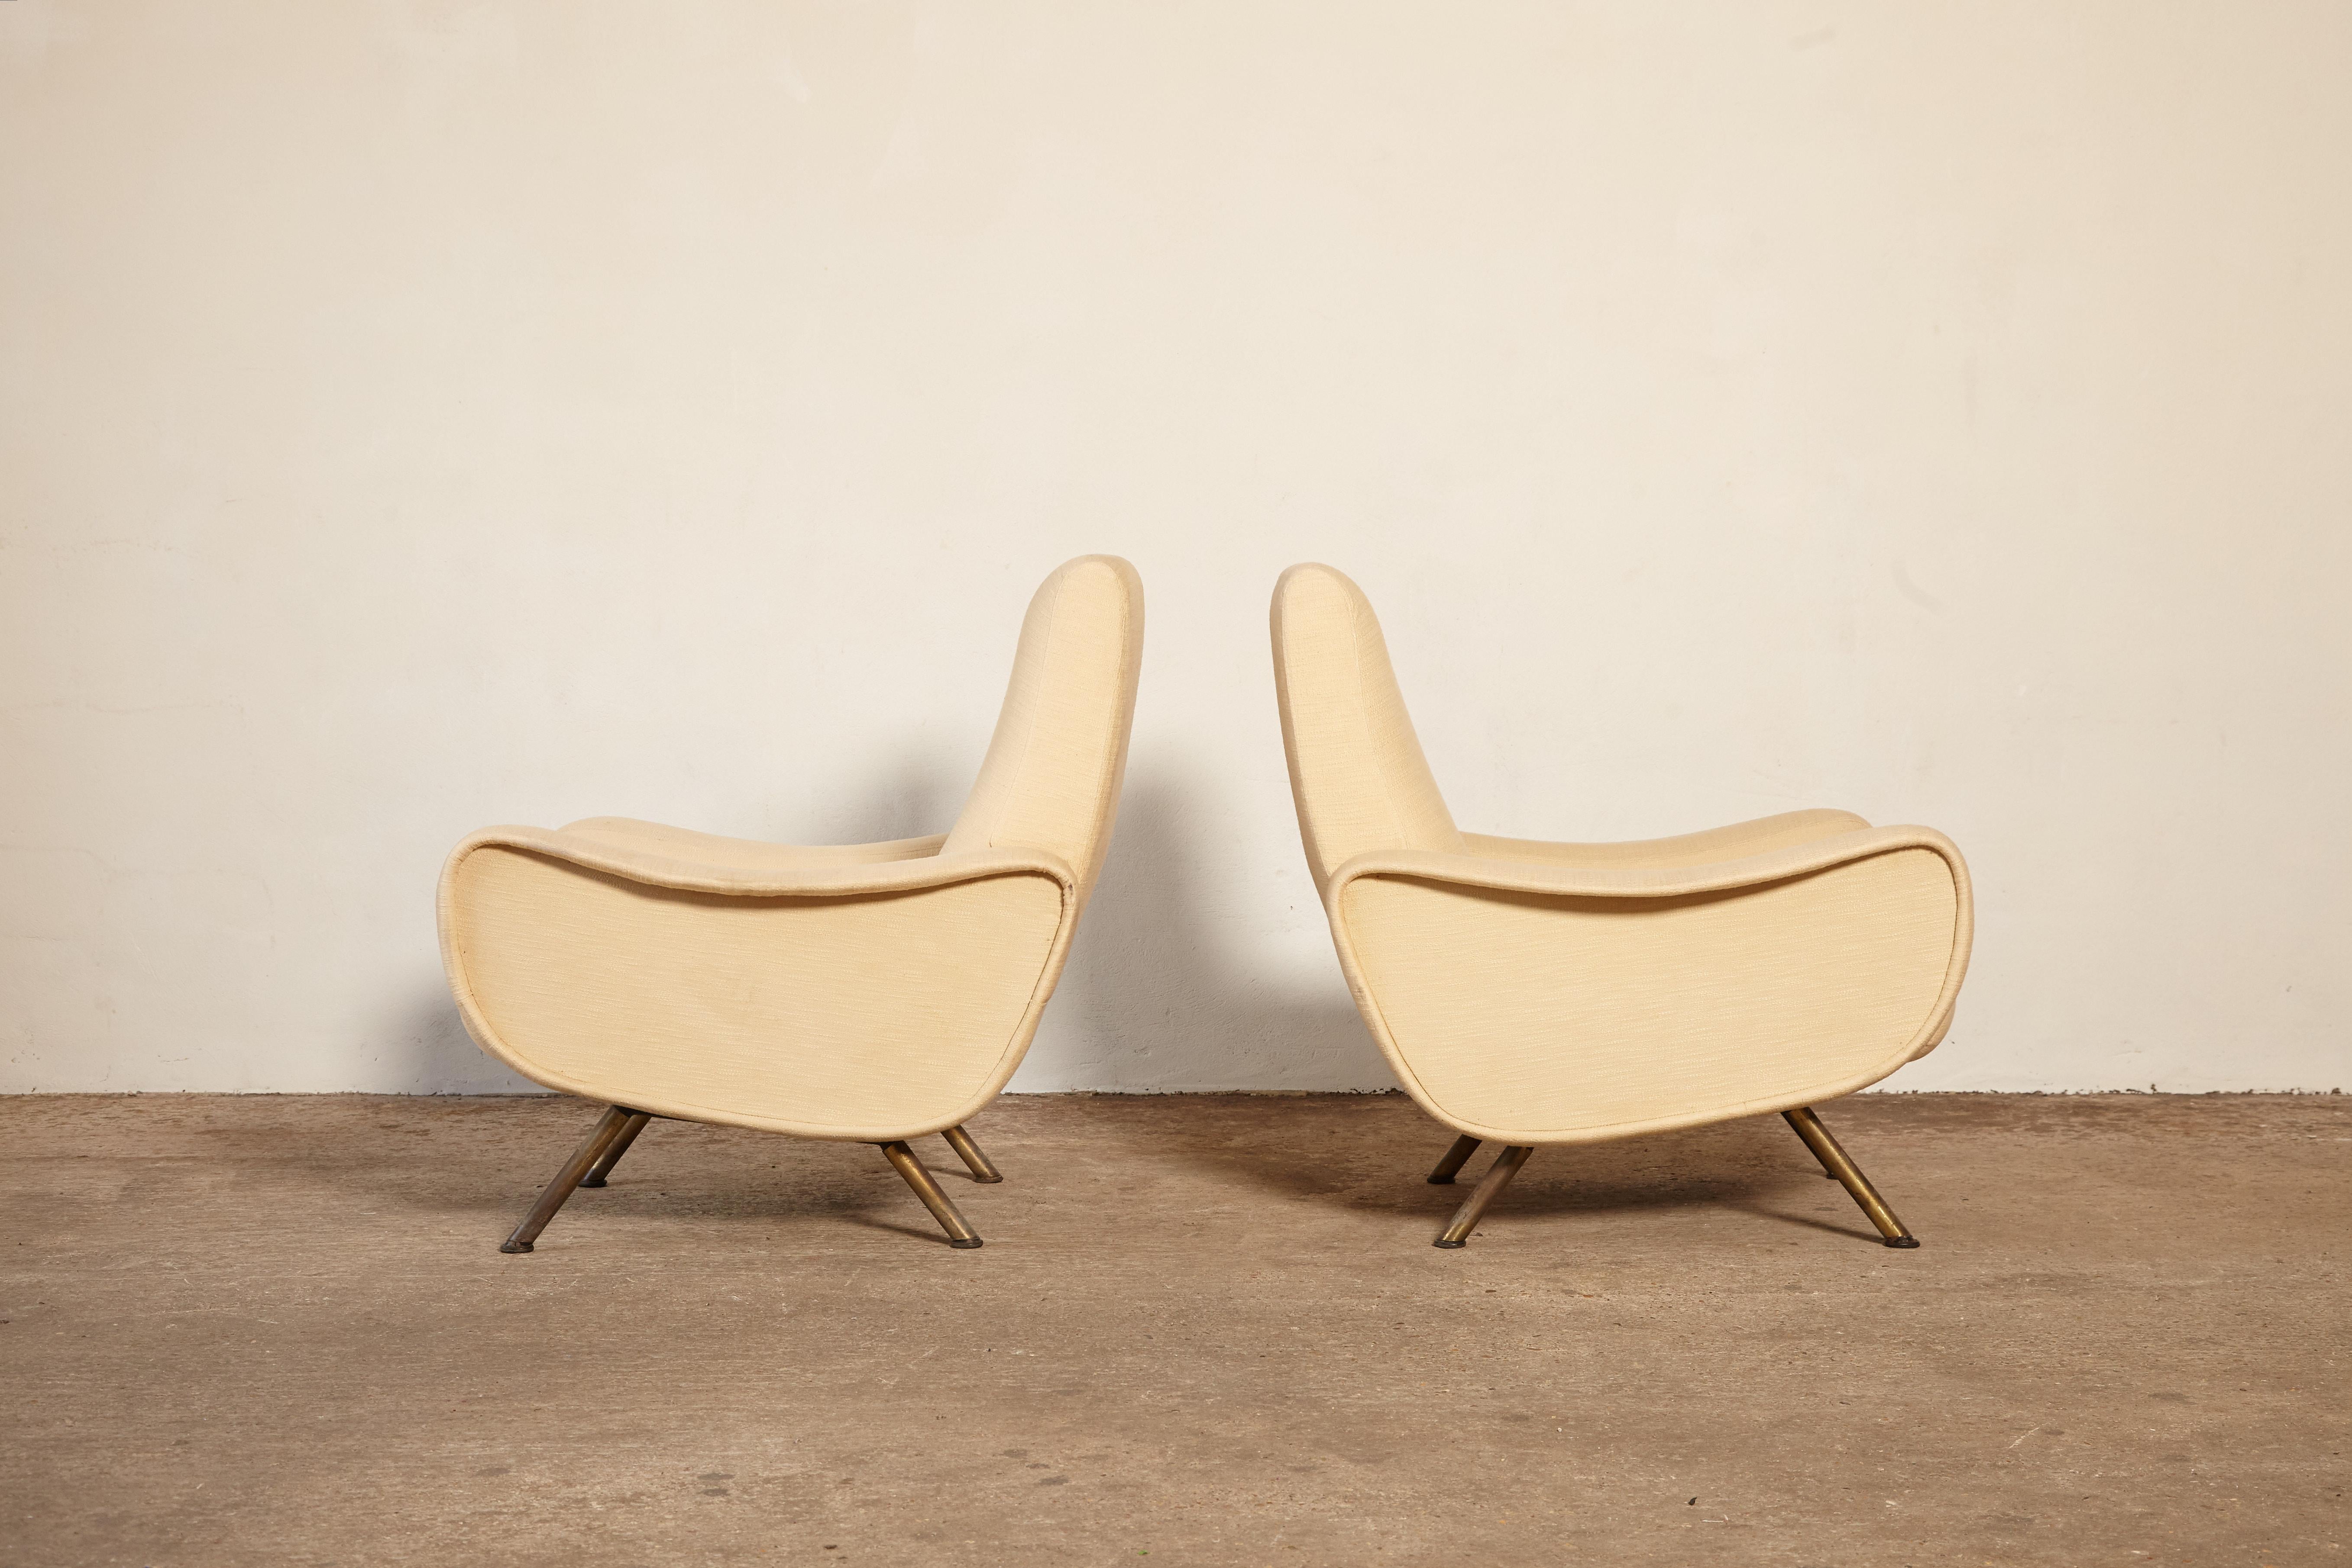 A pair of Marco Zanuso Lady chairs, Arflex, France/Italy, 1960s-1970s. Reupholstered within the last 5/10 years with fabric in good condition with minor signs of use and wear. Ready to use.